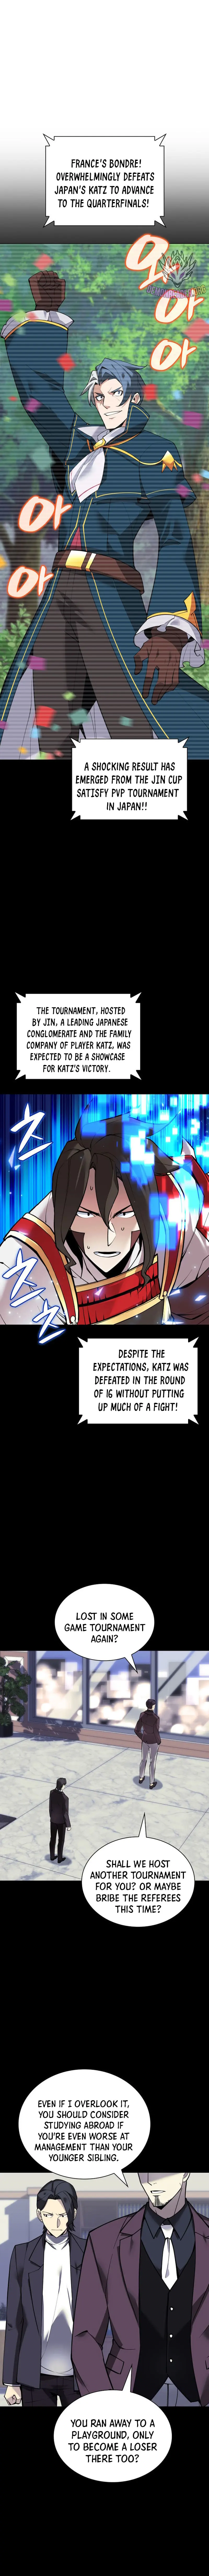 Let's Read Overgeared - Chapter 222 Manga Manhwa Comic toon Online Everyday English Translation on Reaper Scan